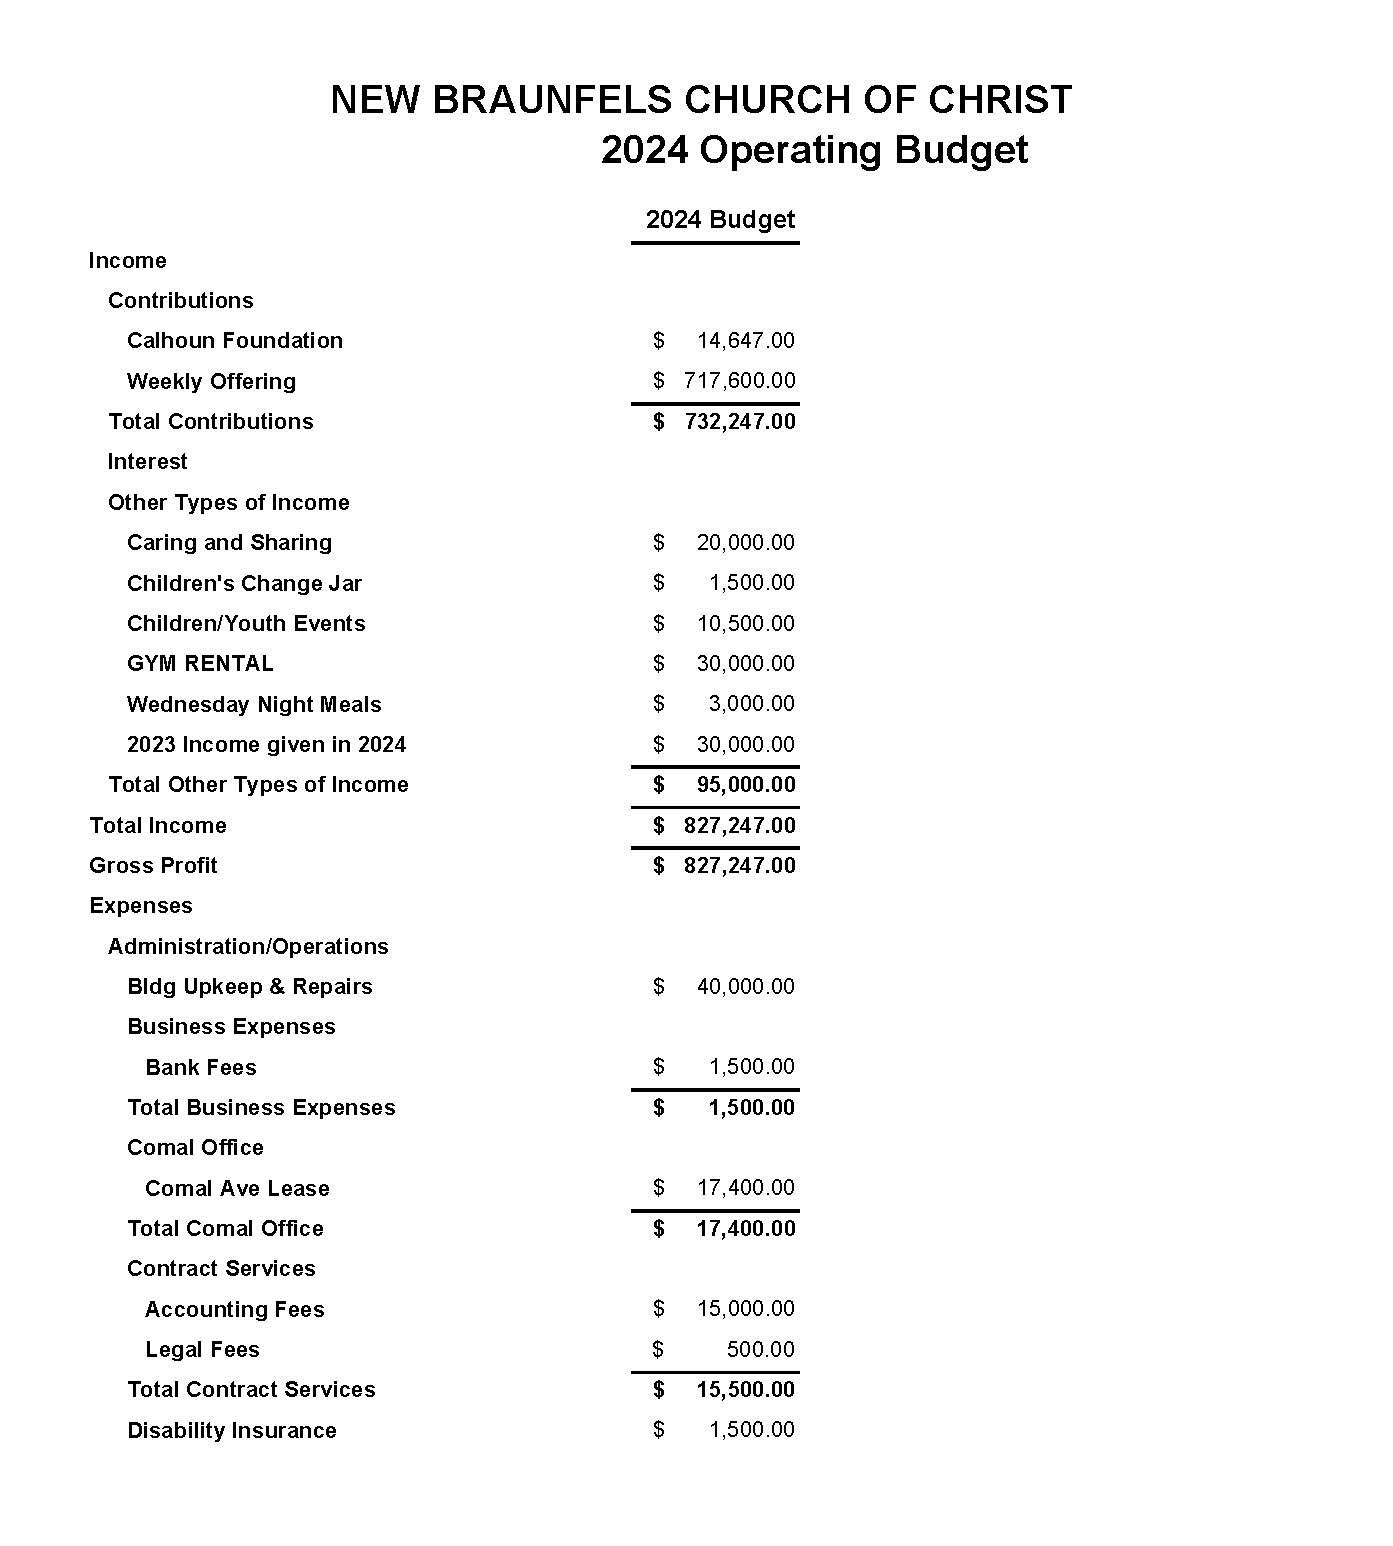 2024 NBCOC Operating Budget_Page_1.jpg